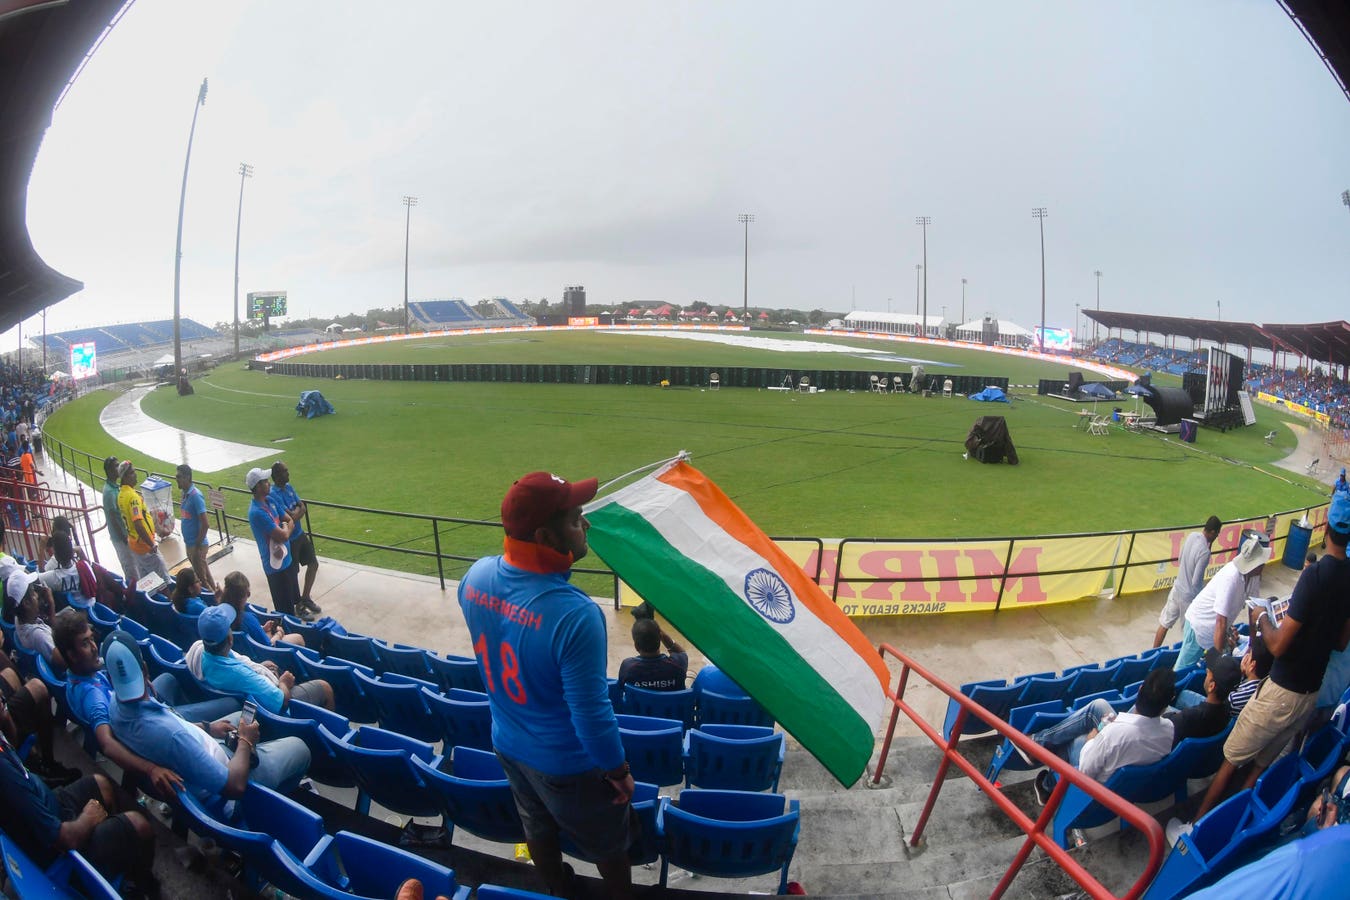 Florida’s Broward County Stadium Expands Before Cricket T20 World Cup